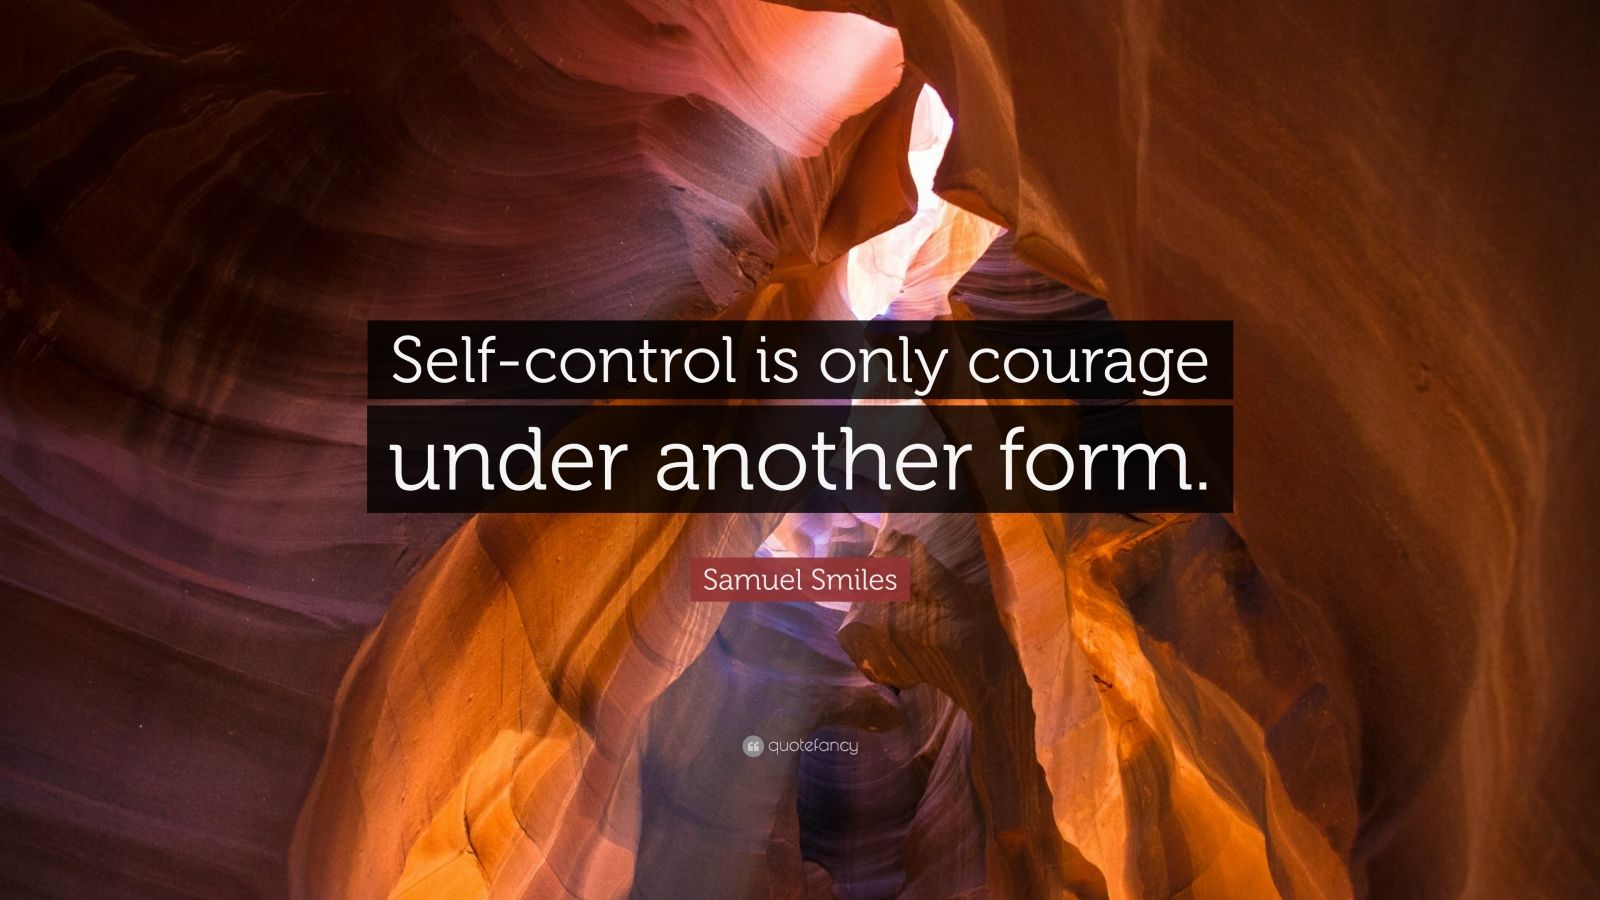 Self Control Quotes (40 Wallpapers) - Quotefancy